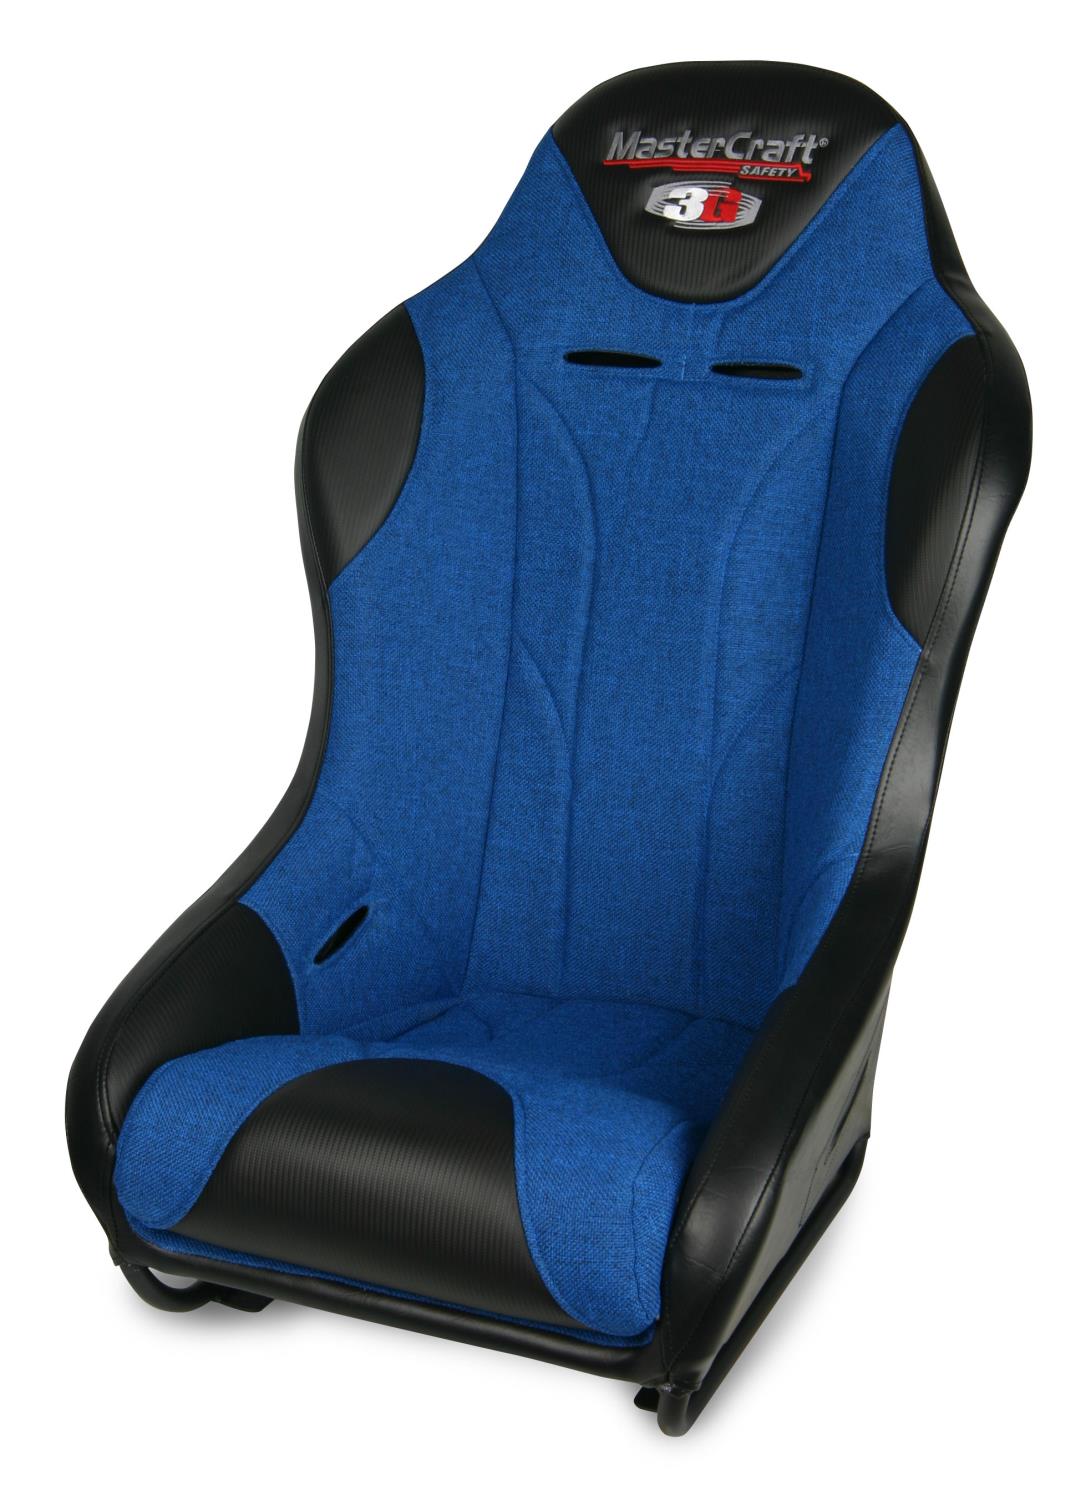 568013 Standard 3G Seat w/DirtSport Stitch Pattern, Black with Blue Fabric Center and Blue Side Panels, Black Band